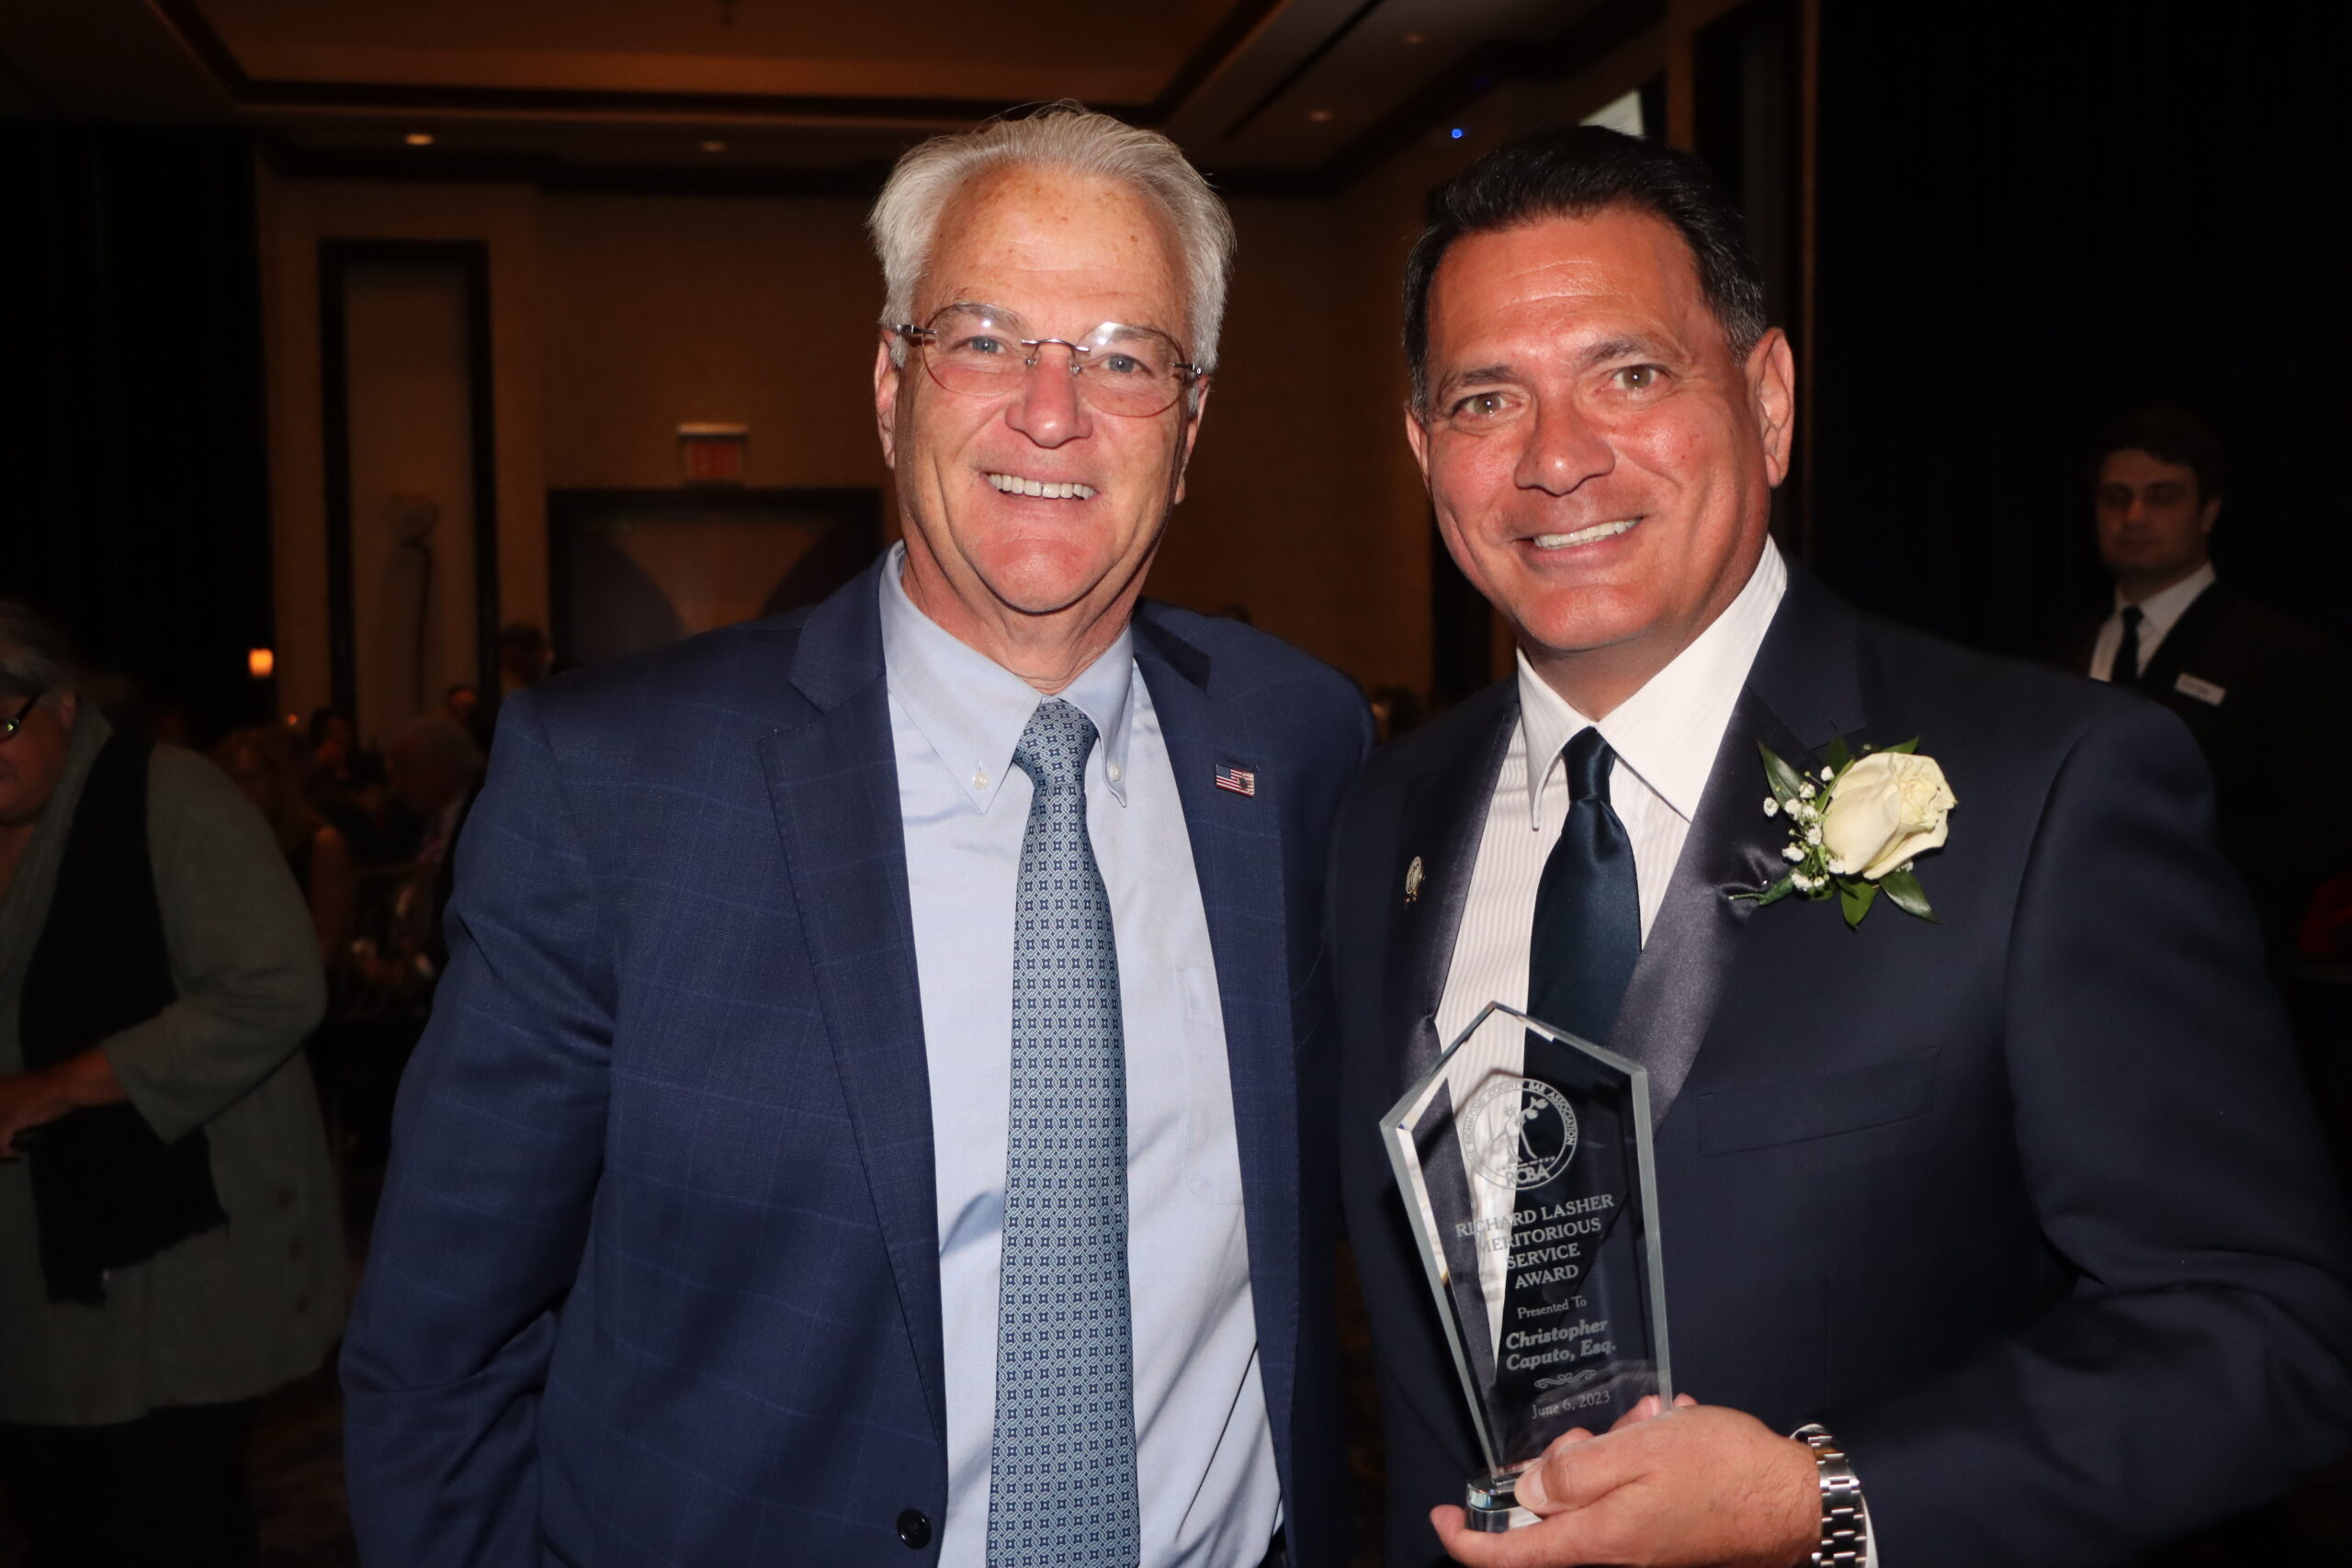 Staten Island District Attorney Michael McMahon (pictured left with Christopher Caputo, past president of the Columbian Lawyers Association of Brooklyn) was installed as president of DAASNY on Monday. Brooklyn Eagle photo by Mario Belluomo